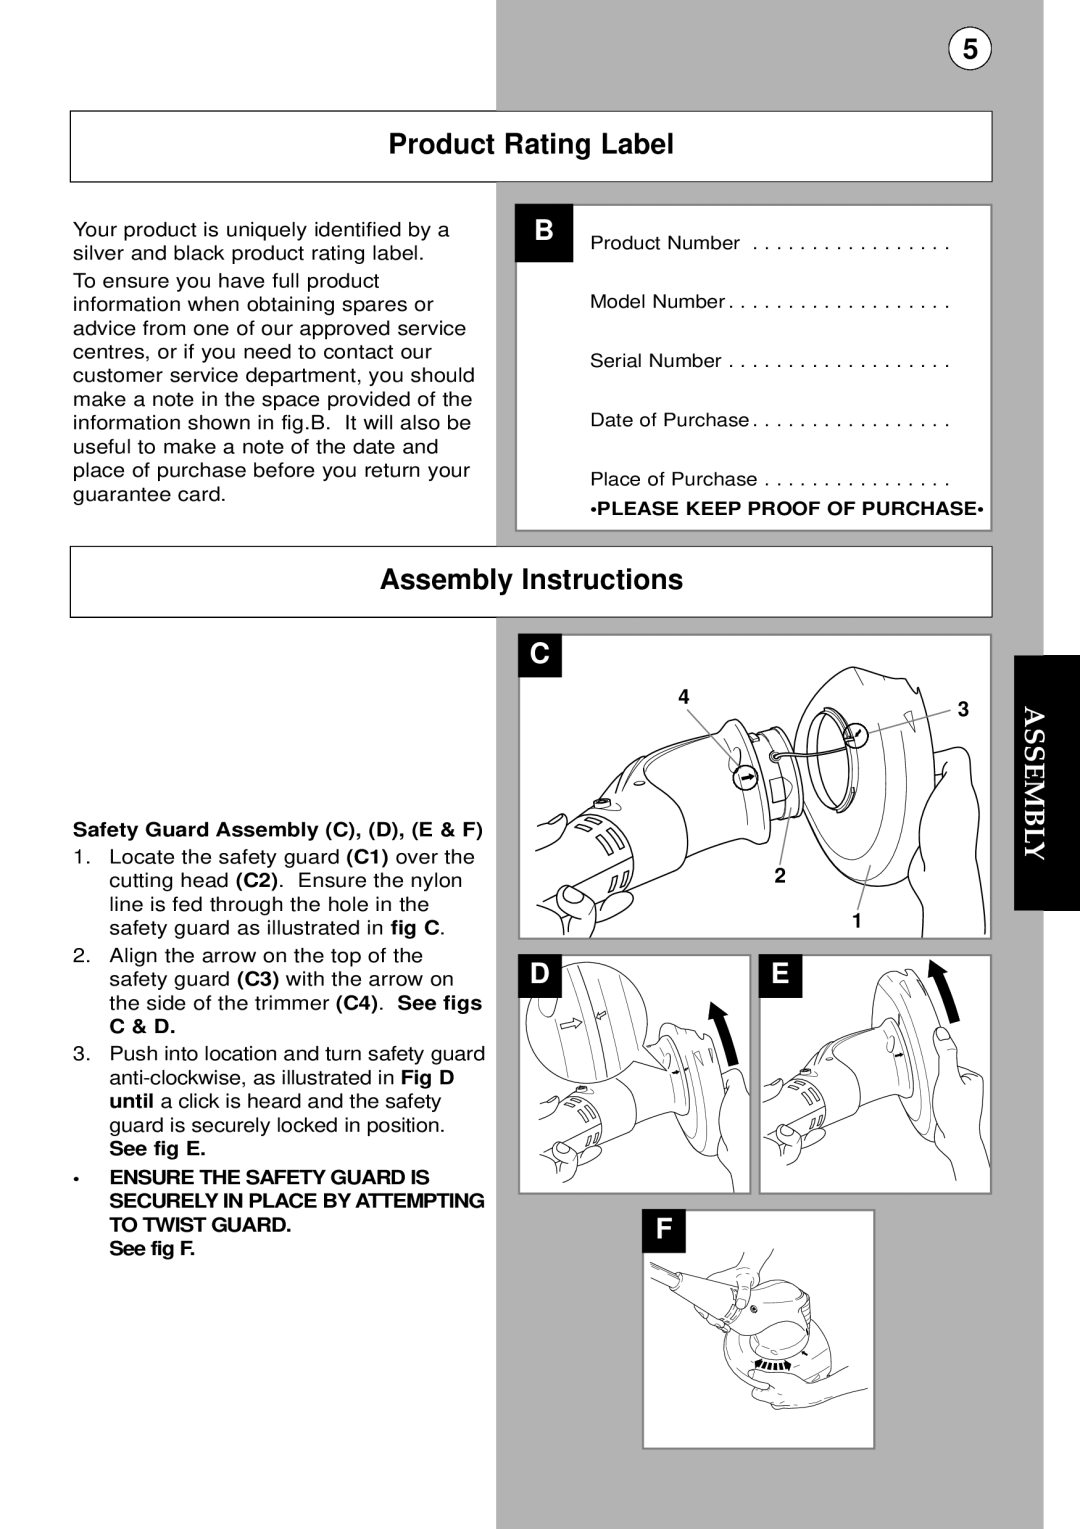 Flymo MCT250 instruction manual Product Rating Label, Assembly Instructions 